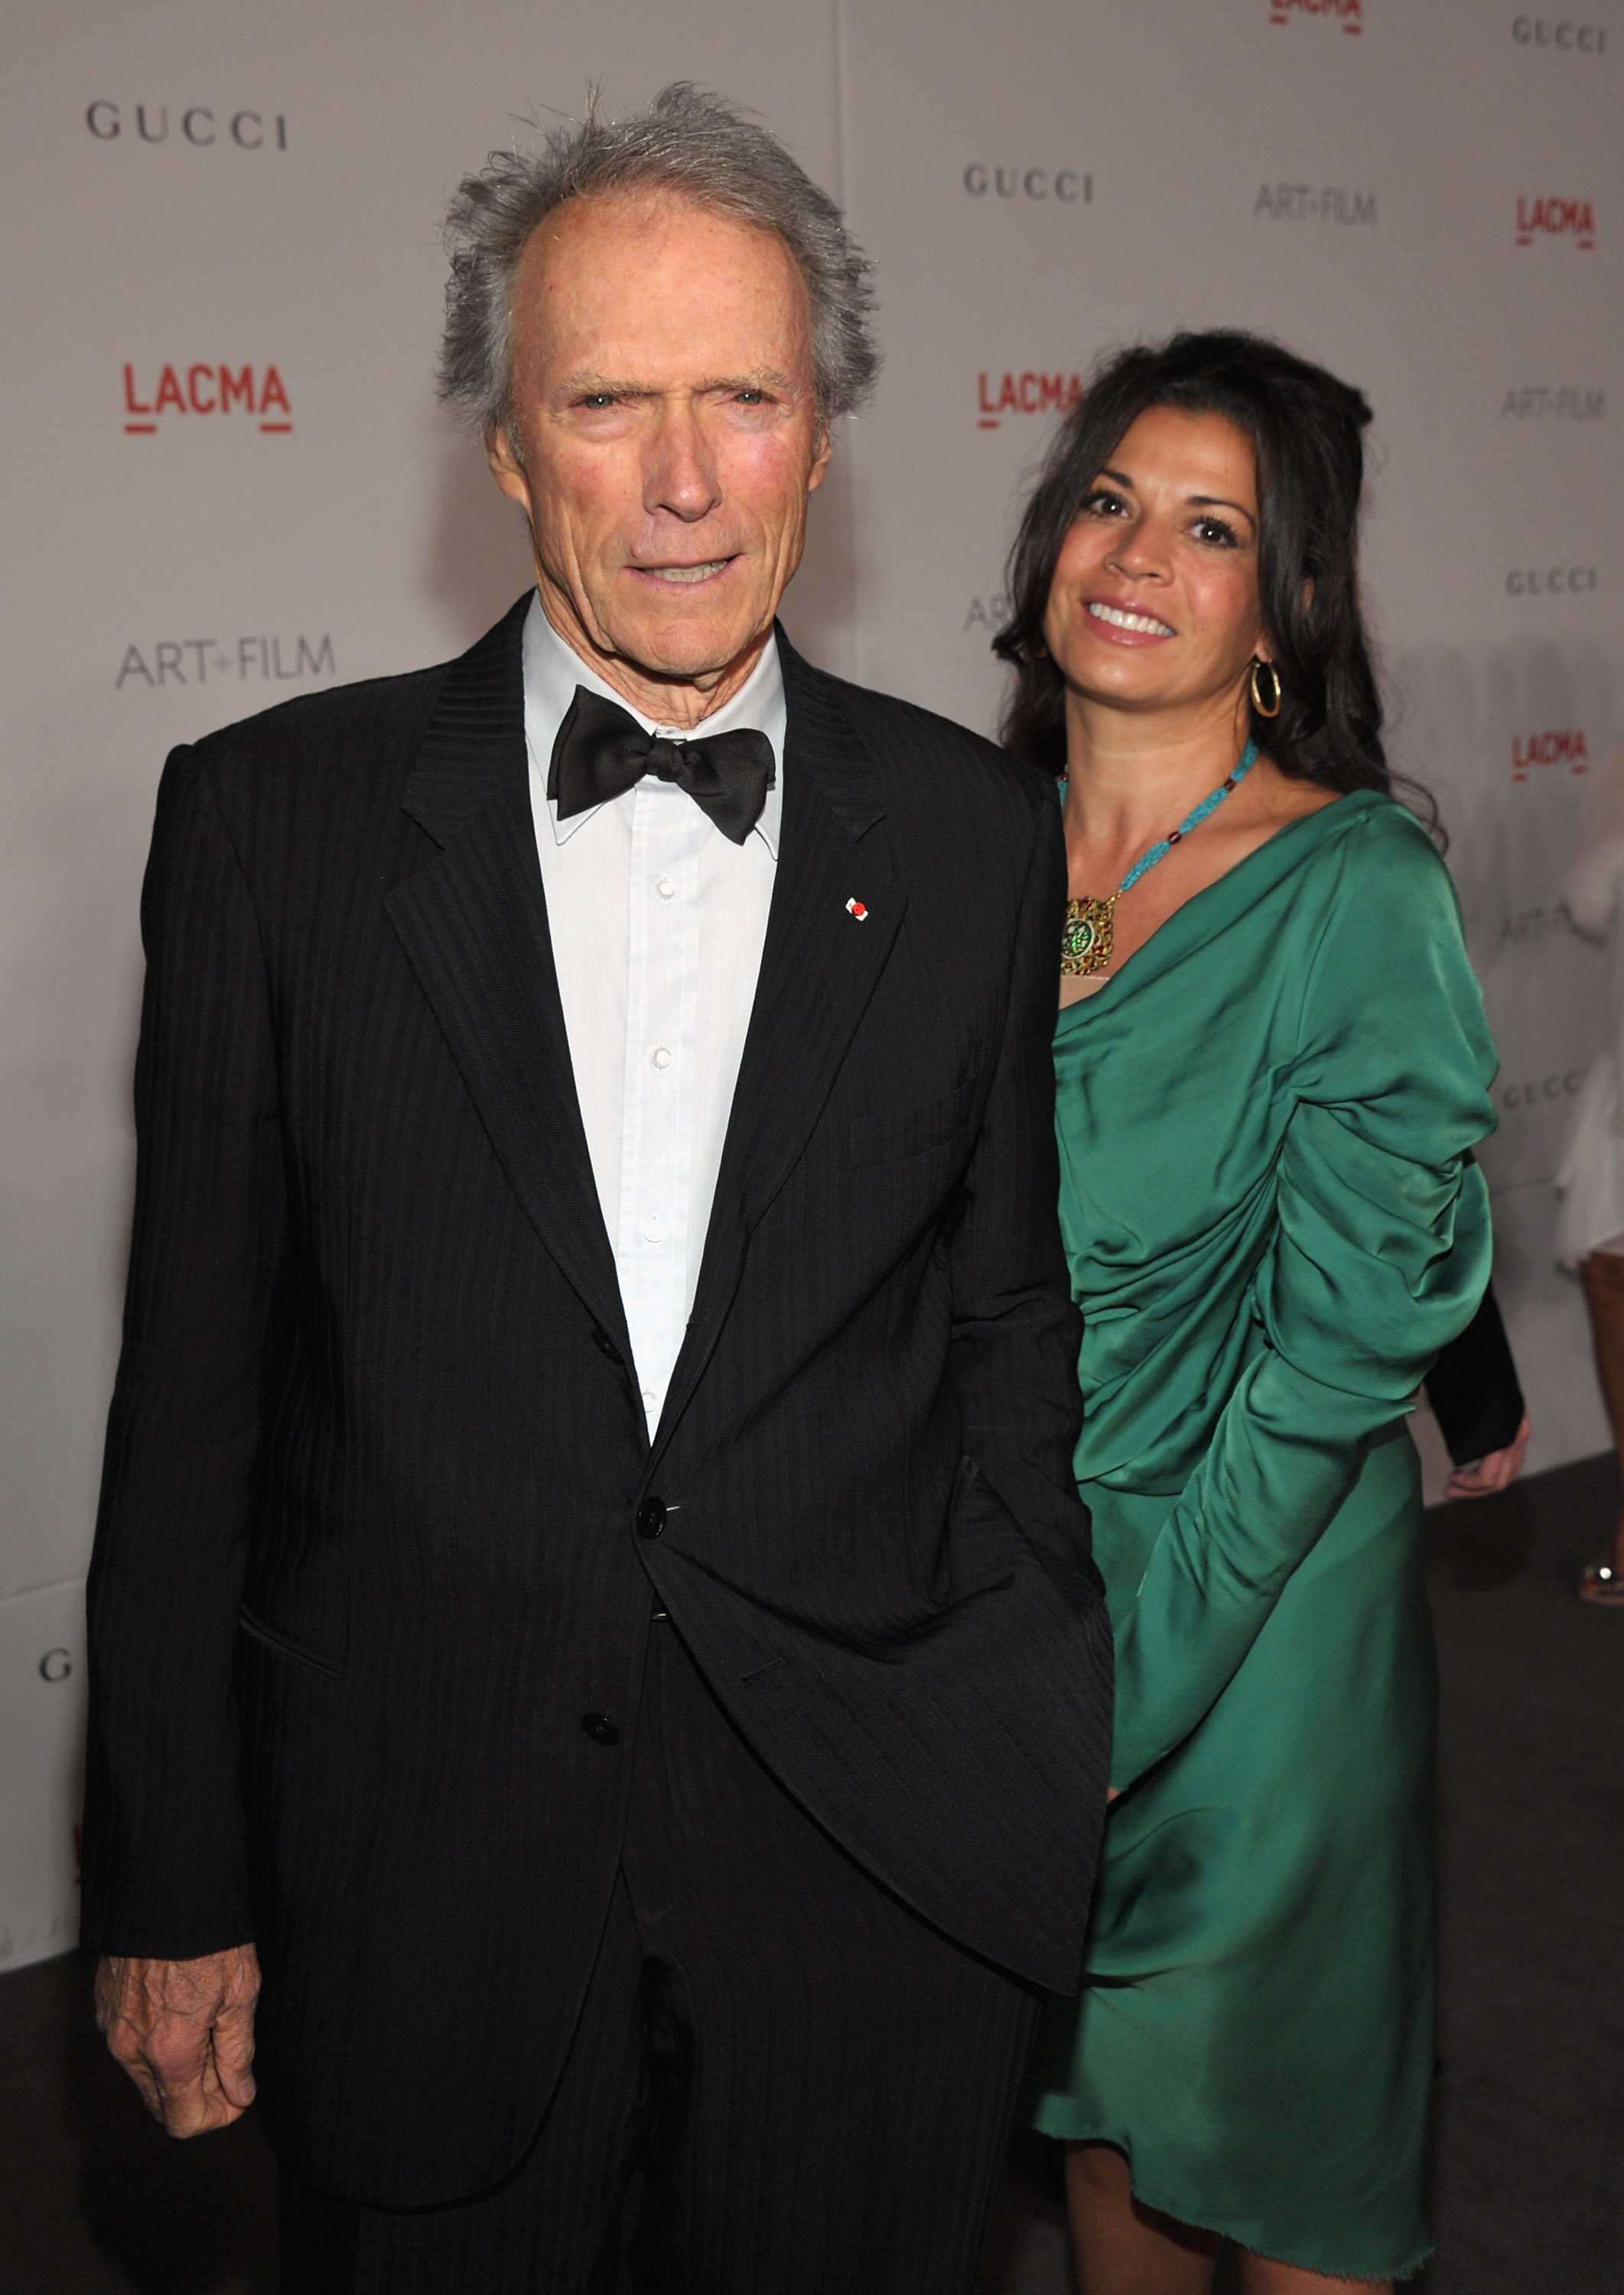 Clint Eastwood and wife Dina Eastwood attend LACMA Art + Film Gala Honoring Clint Eastwood and John Baldessari at Los Angeles County Museum of Art on November 5, 2011. | Source: Getty Images